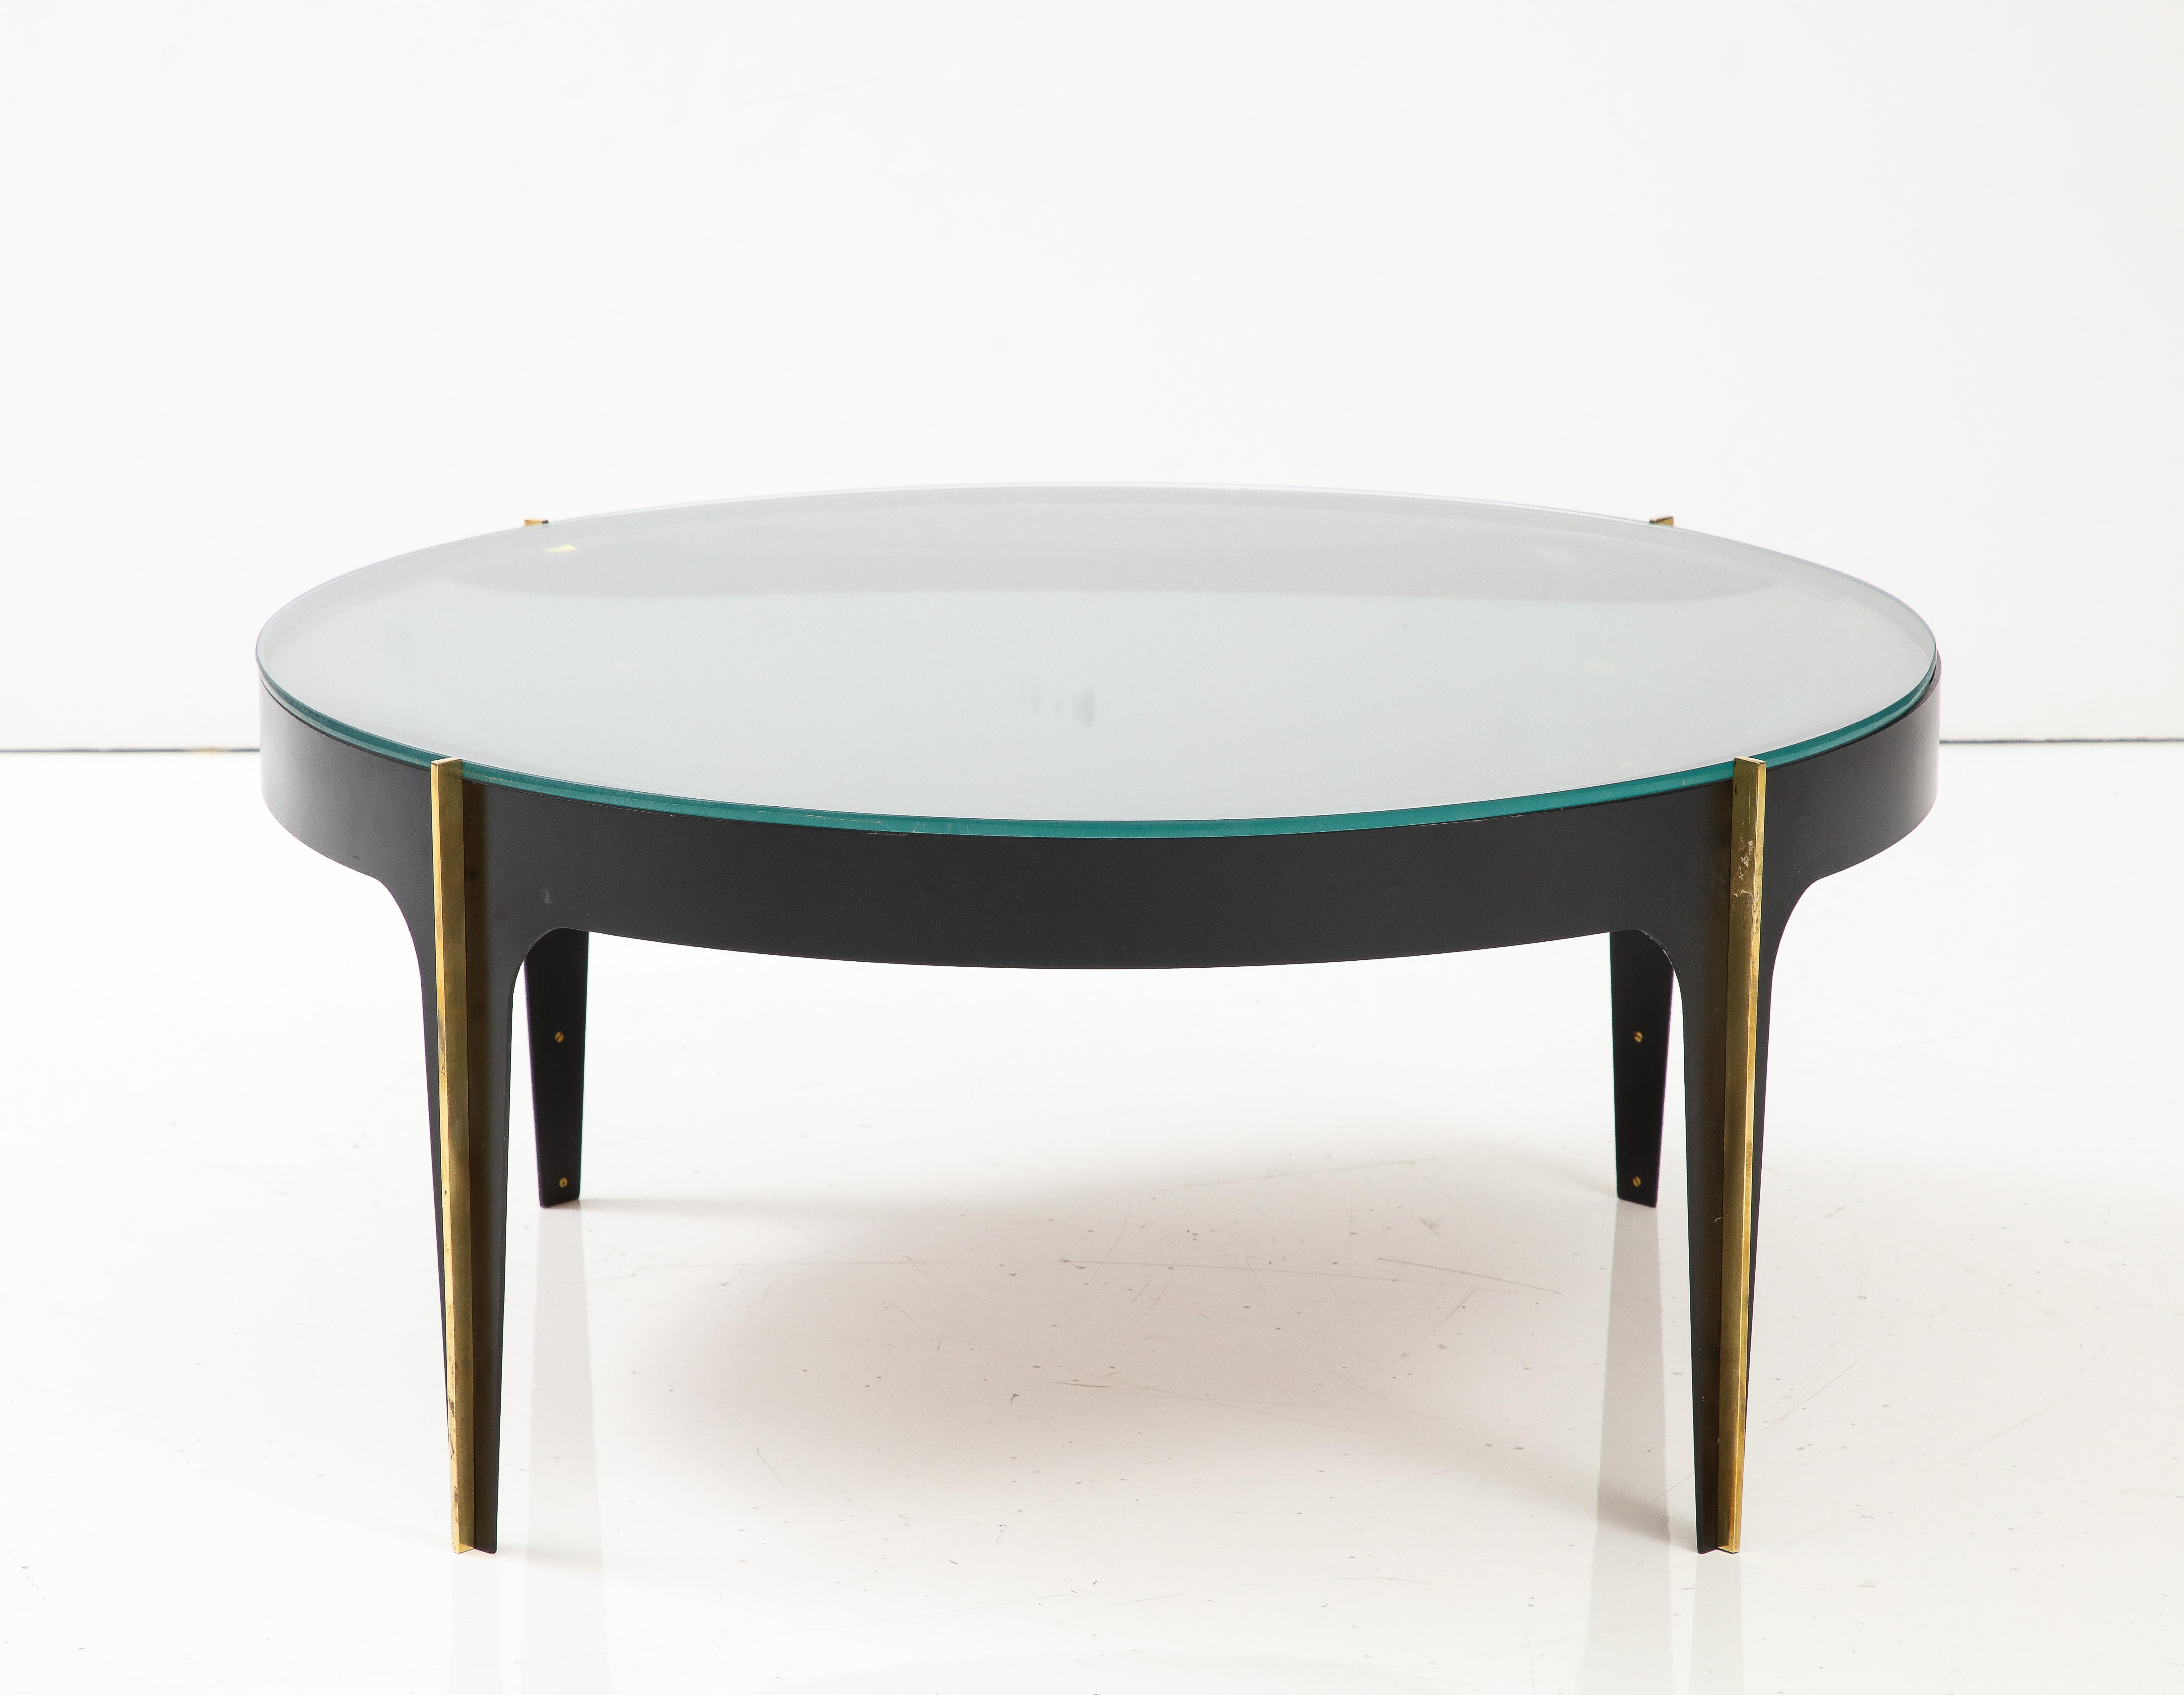 Iconic round cocktail table attributed to renowned French designer Max Ingrand for Fontana Arte Model 1774, Italy, late 1960s. The cocktail table consists of a round structure in black enameled metal with vertical solid brass inserts on the legs.